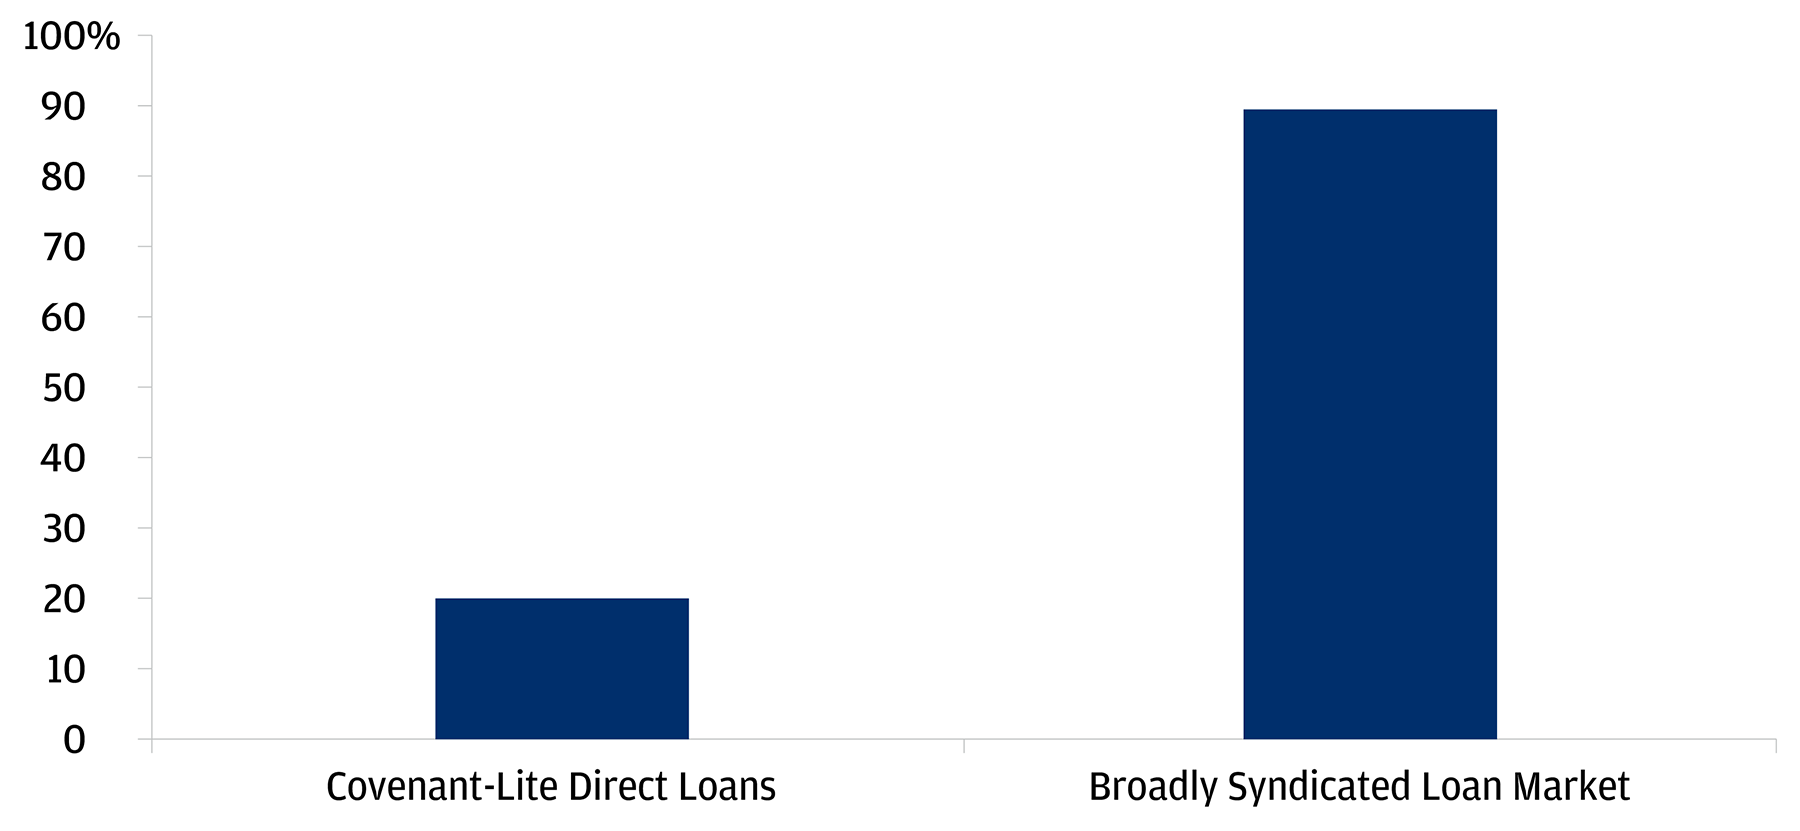 This compares the percent of new direct lending that are covenant lite to the share of the leveraged loan market that is covenant lite.